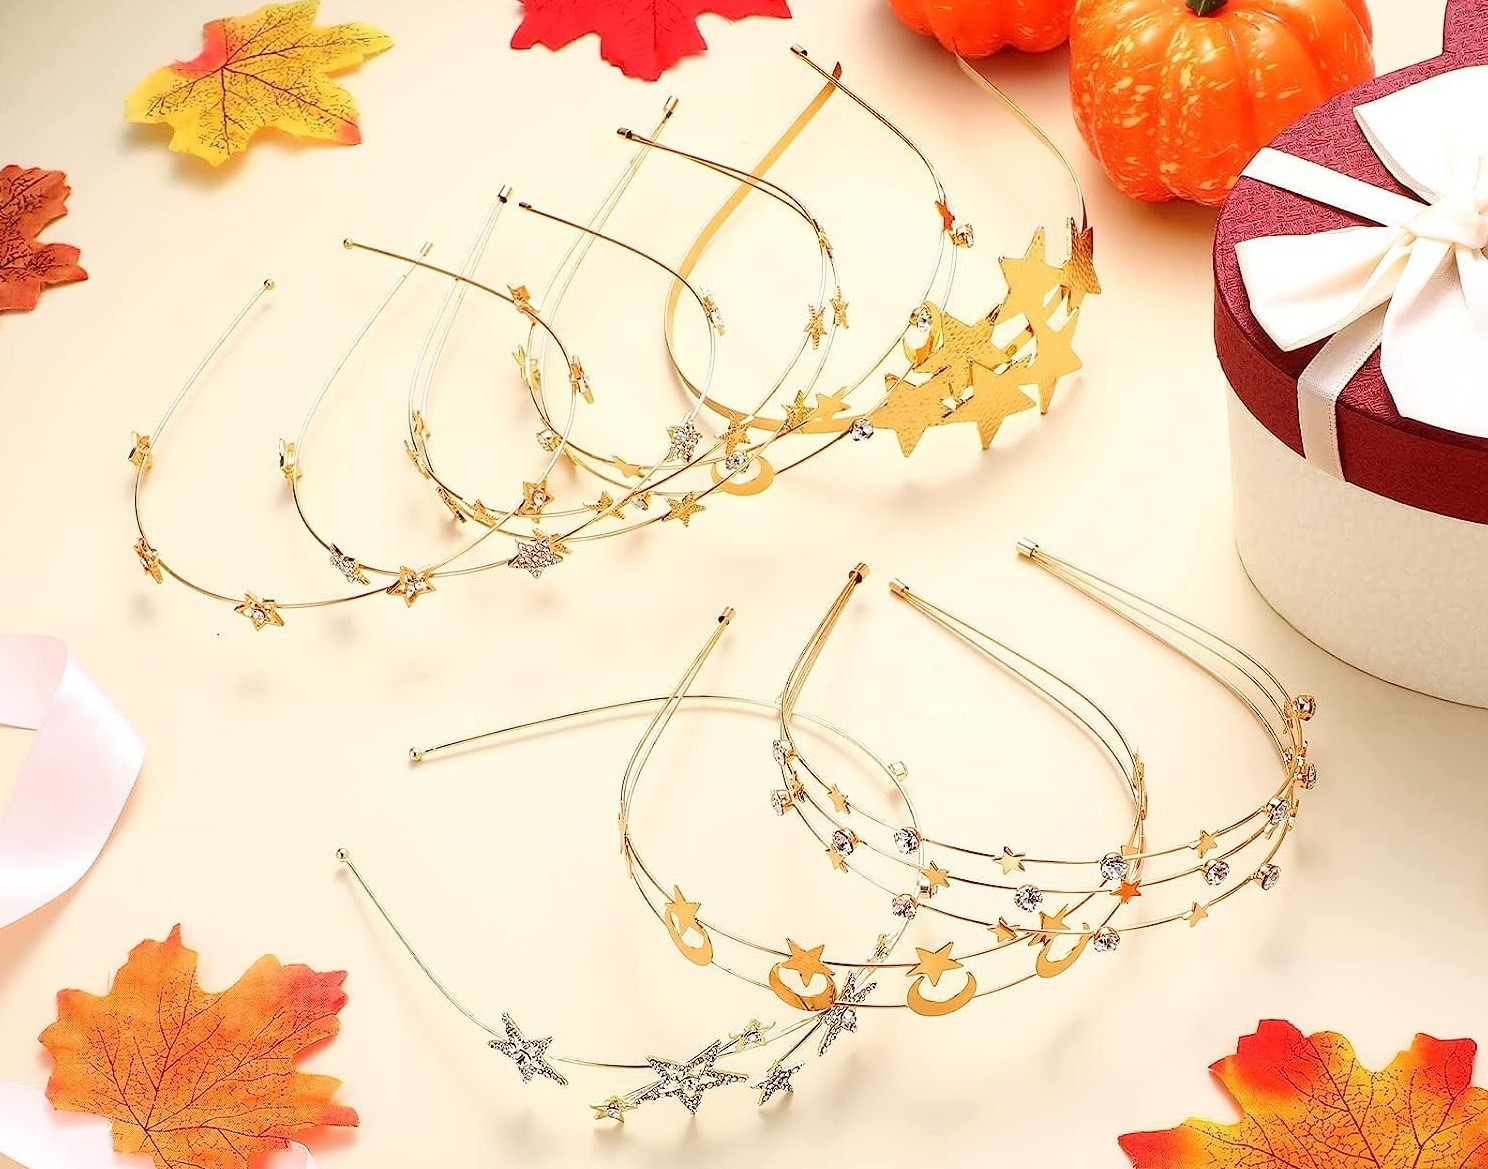 the variety of gold and silver headbands